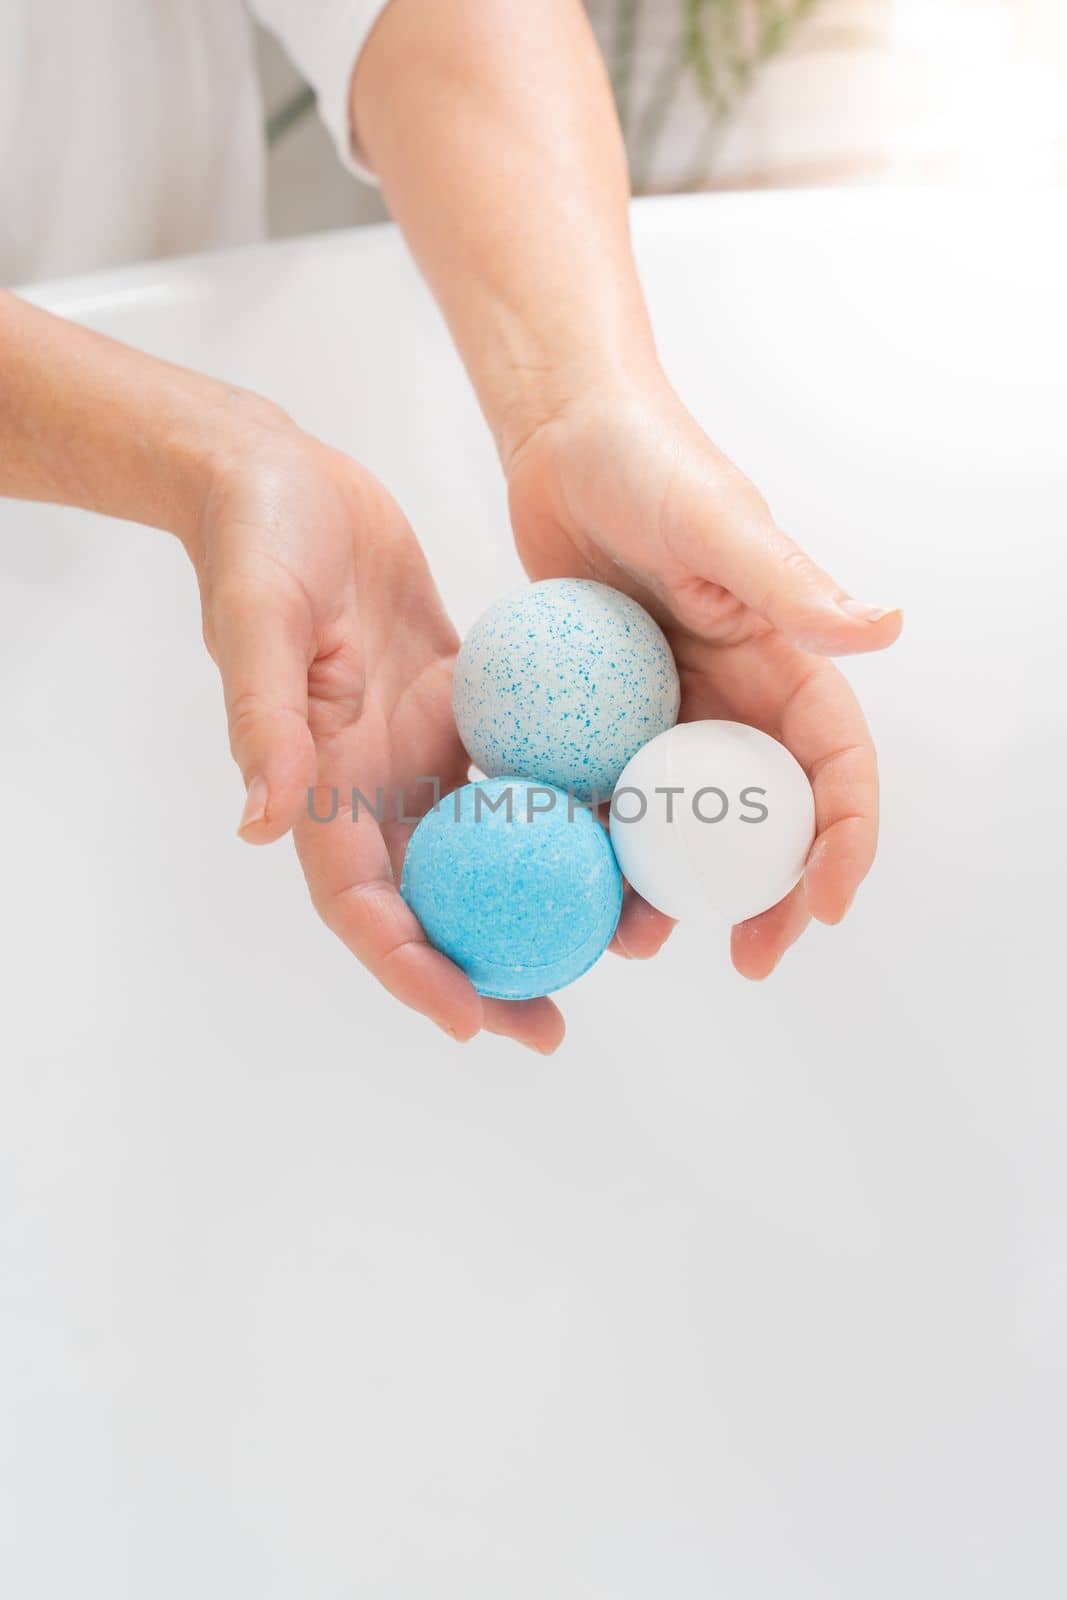 Vertical closeup of a woman's hands putting salt and soap balls in the bathtub for skin and body care.